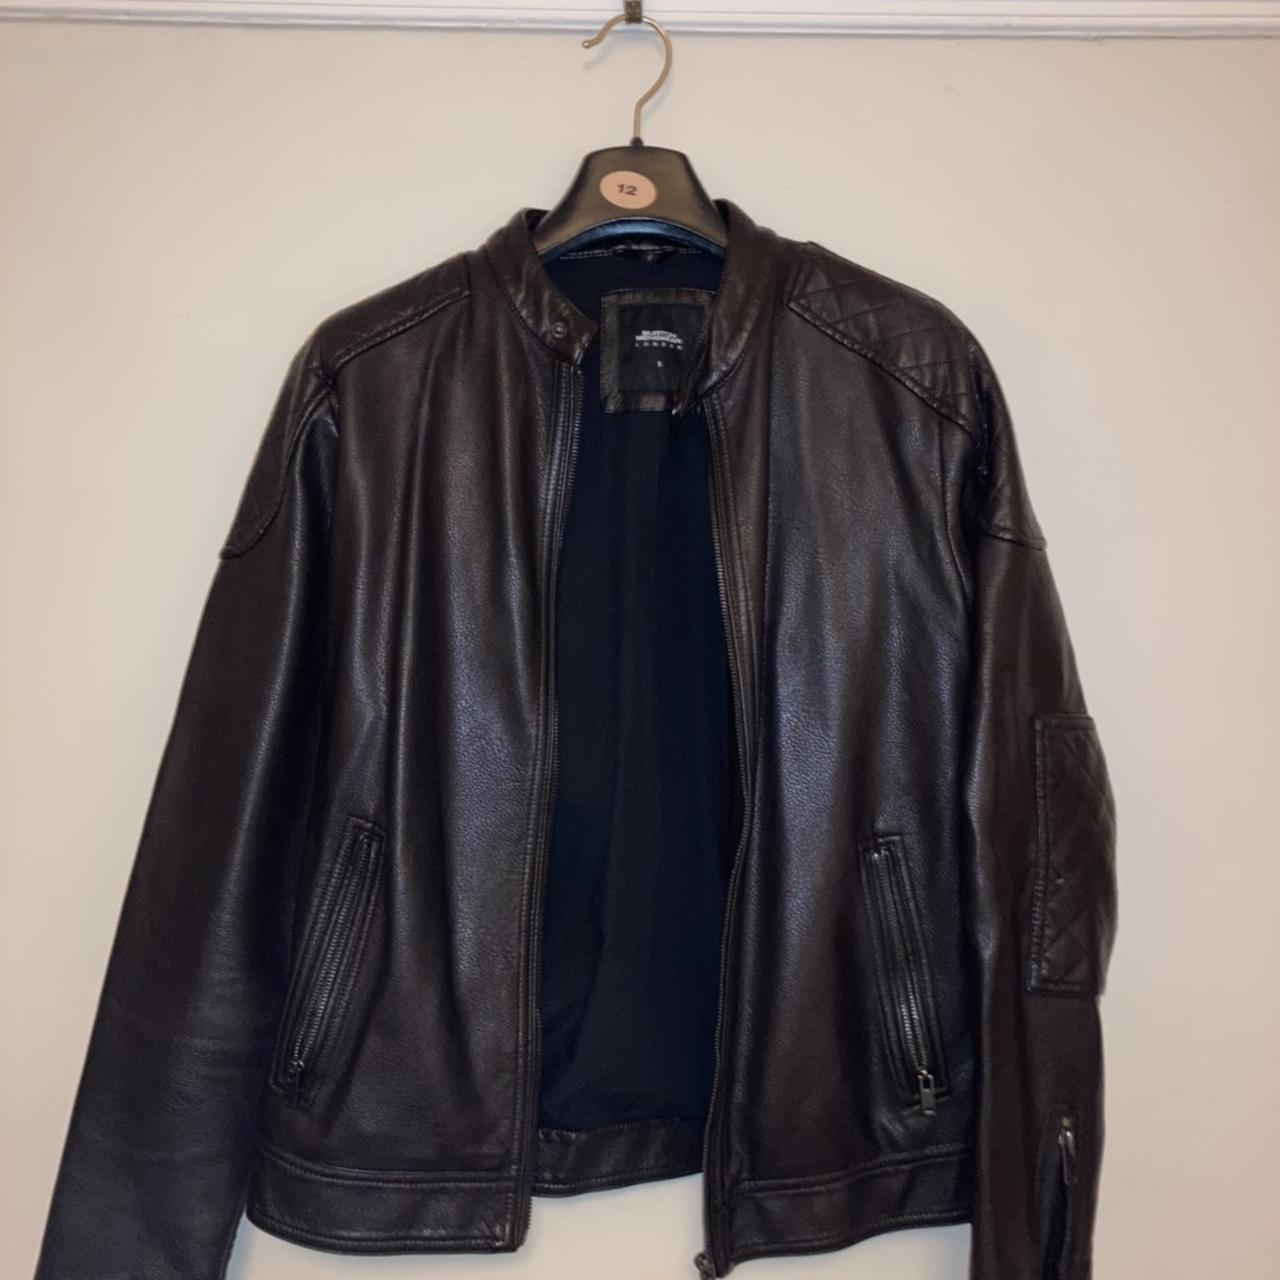 Burtons brown faux-leather jacket. Worn but quality... - Depop